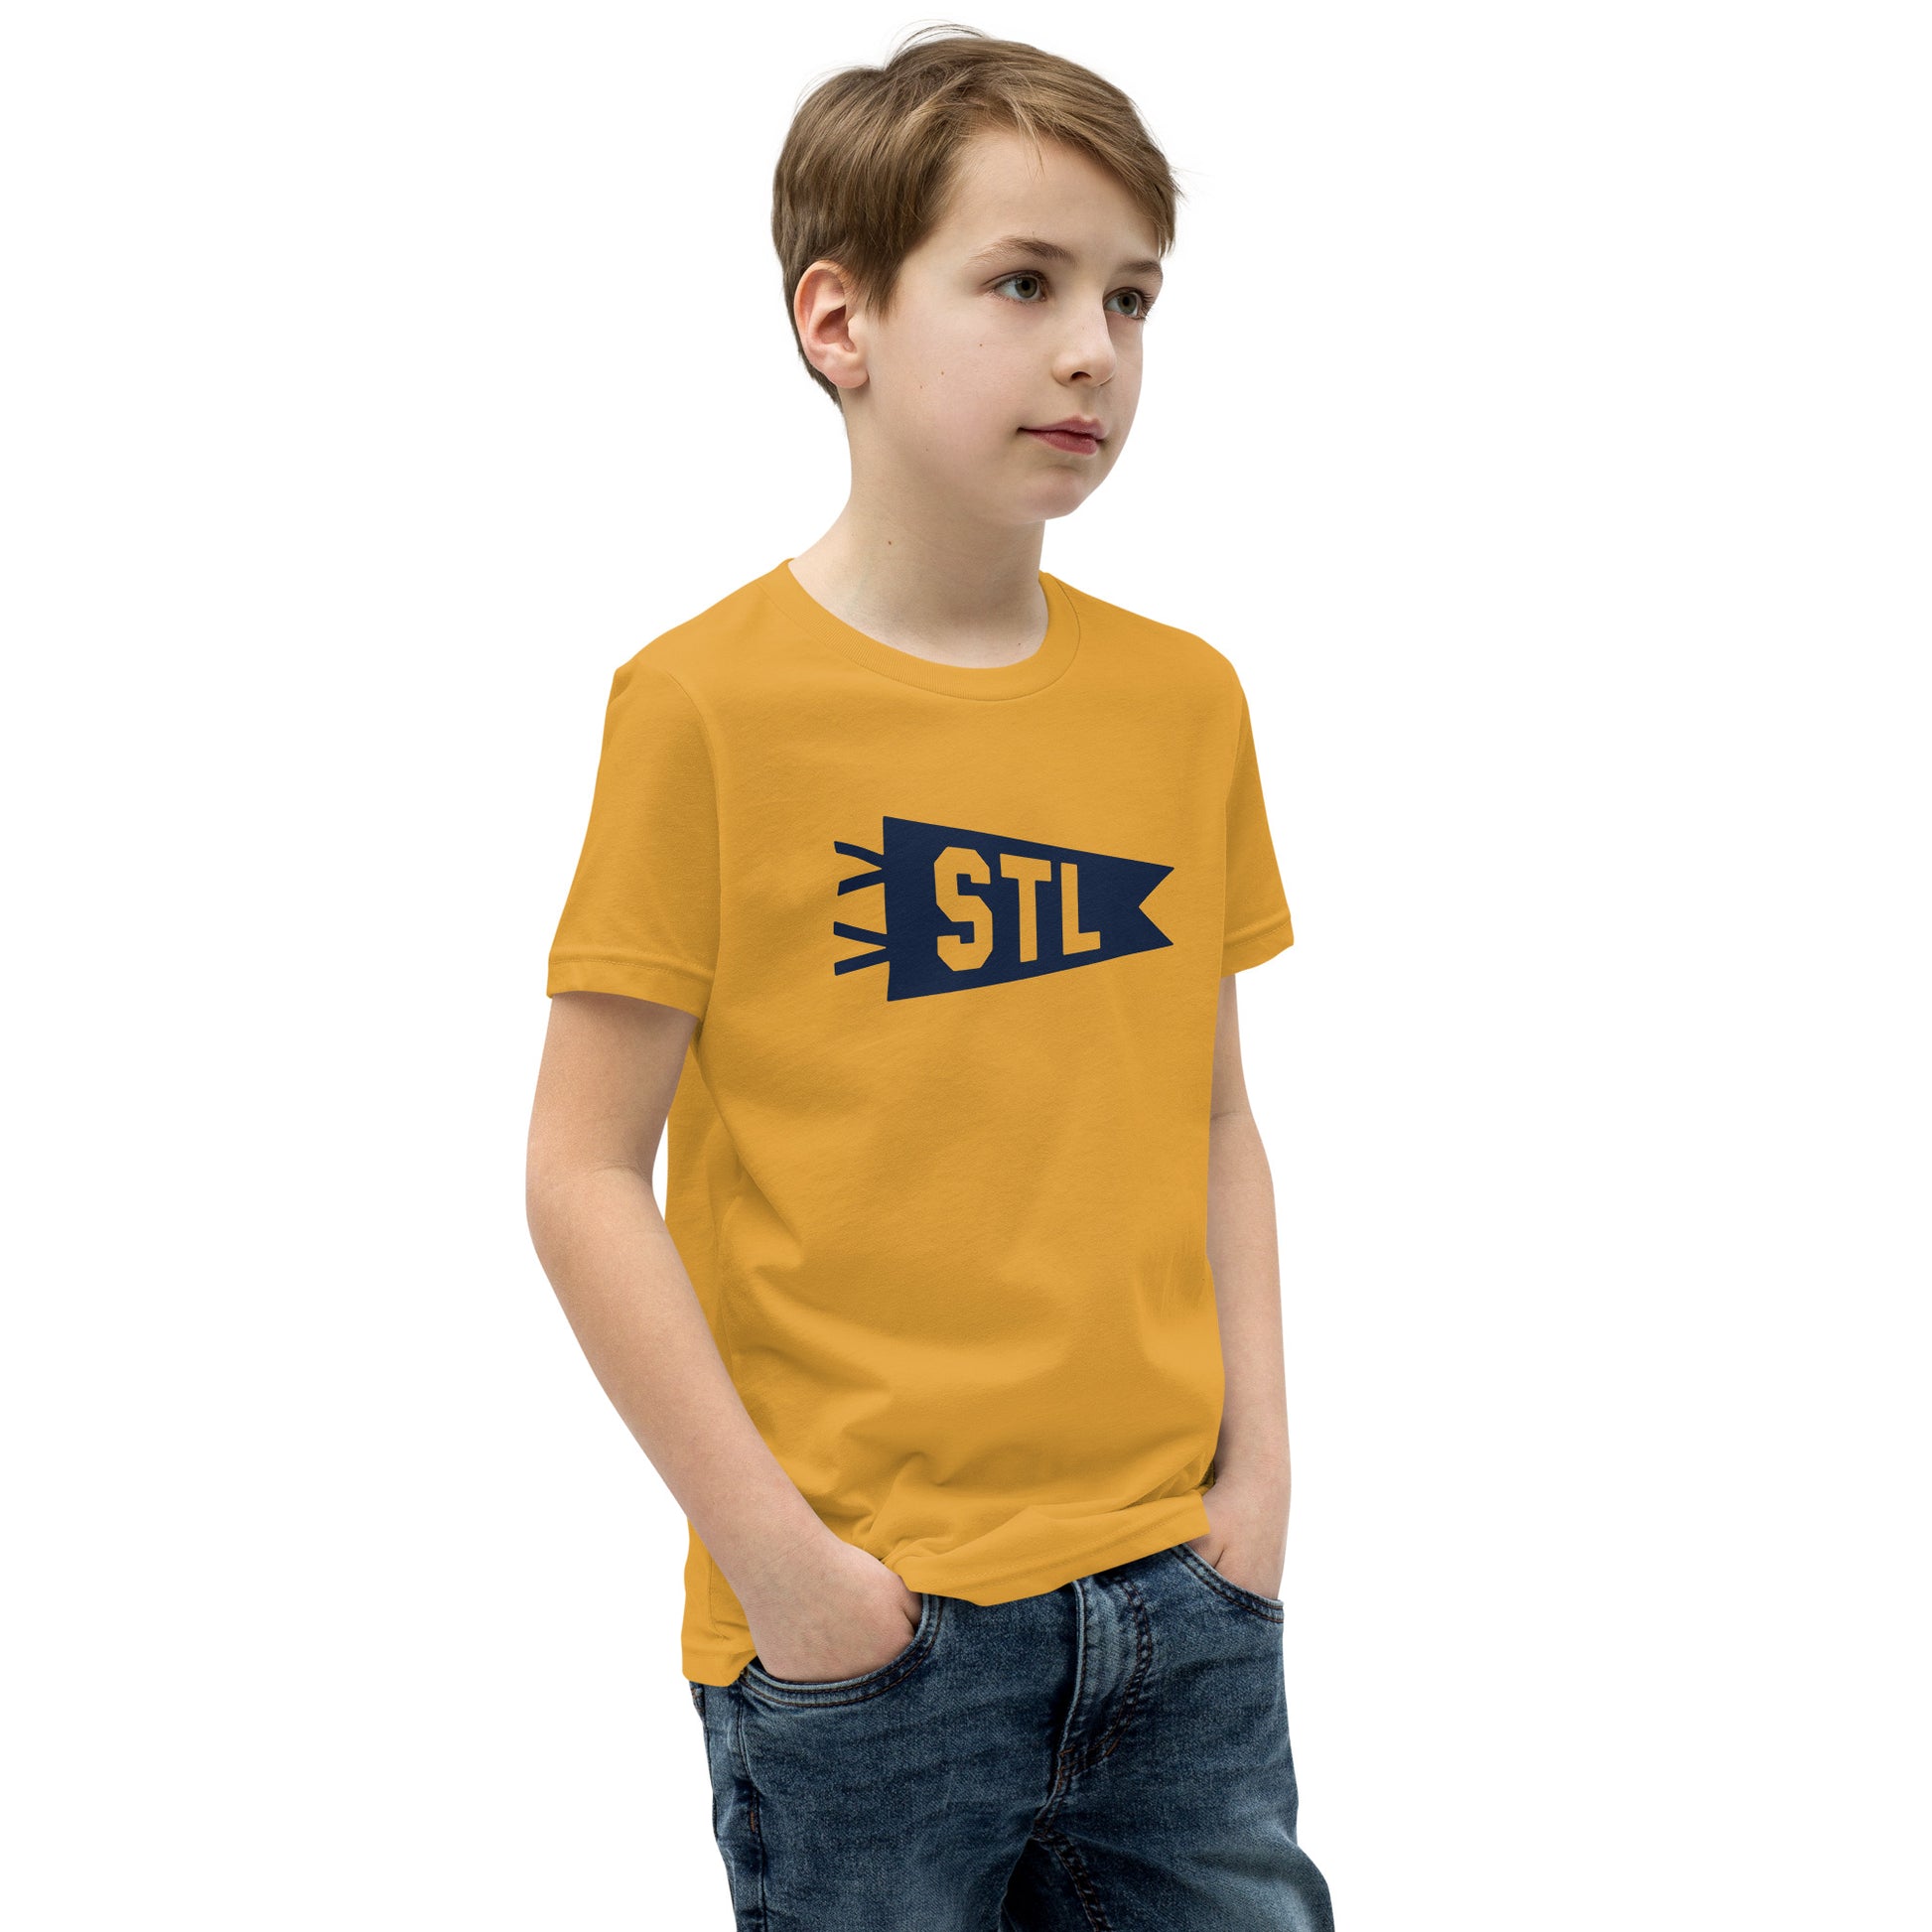 Kid's Airport Code Tee - Navy Blue Graphic • STL St. Louis • YHM Designs - Image 07